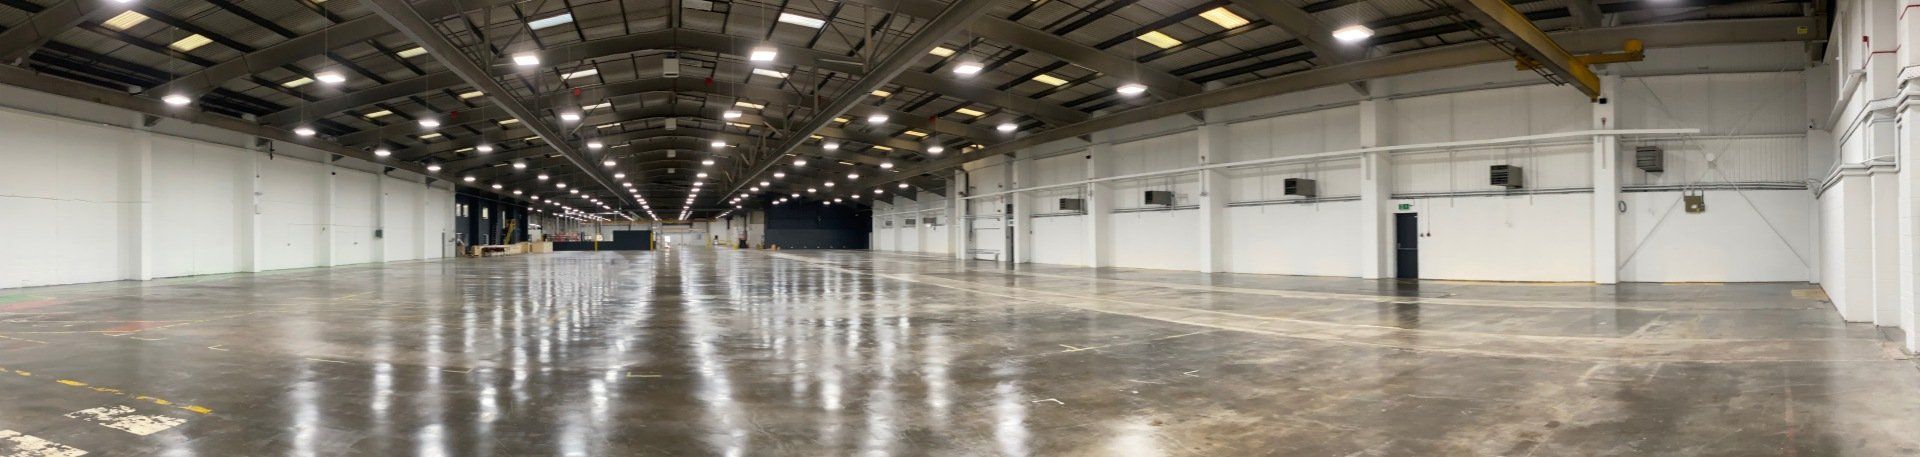 a large empty warehouse in need of warm air heating units